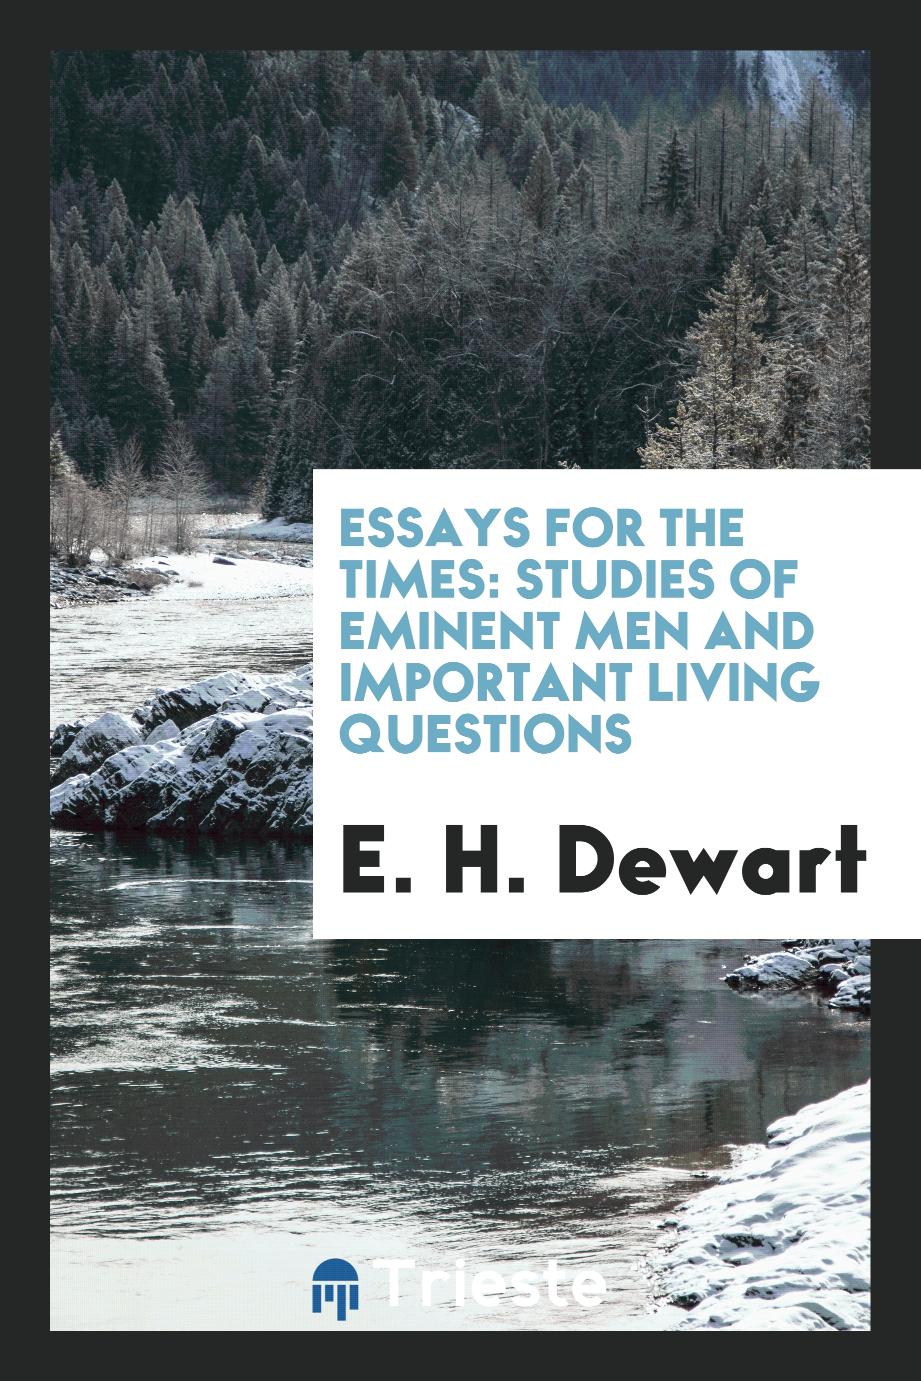 Essays for the times: studies of eminent men and important living questions